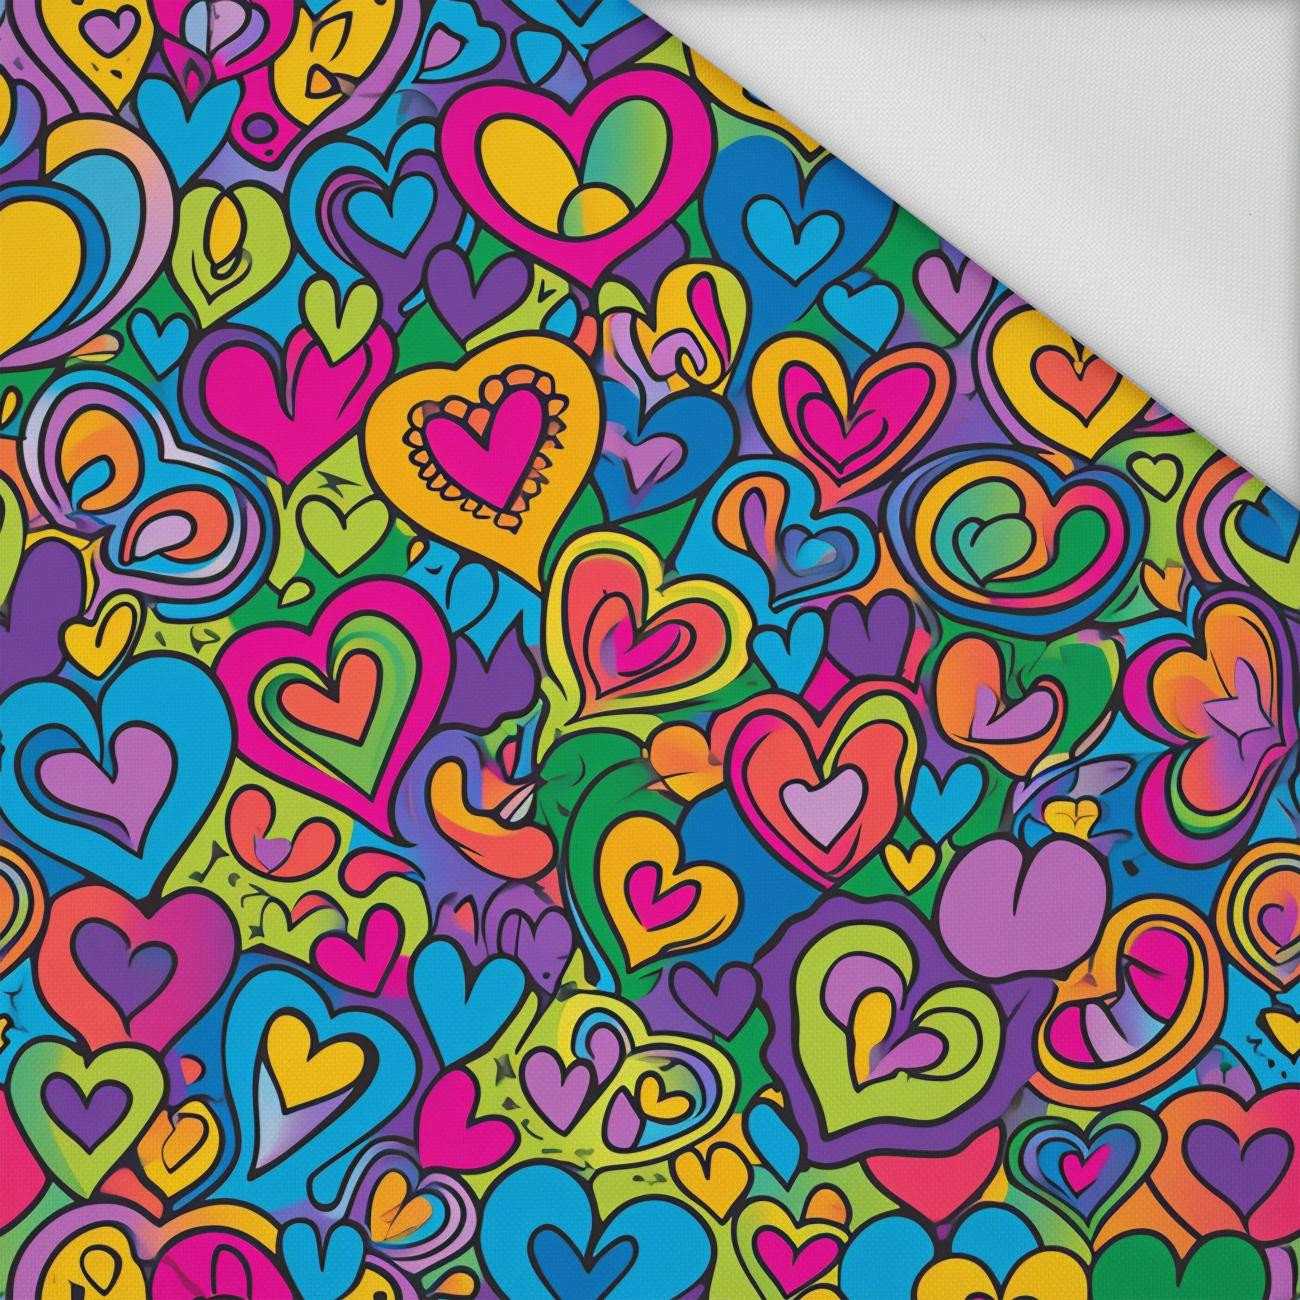 COLORFUL HEARTS - Waterproof woven fabric